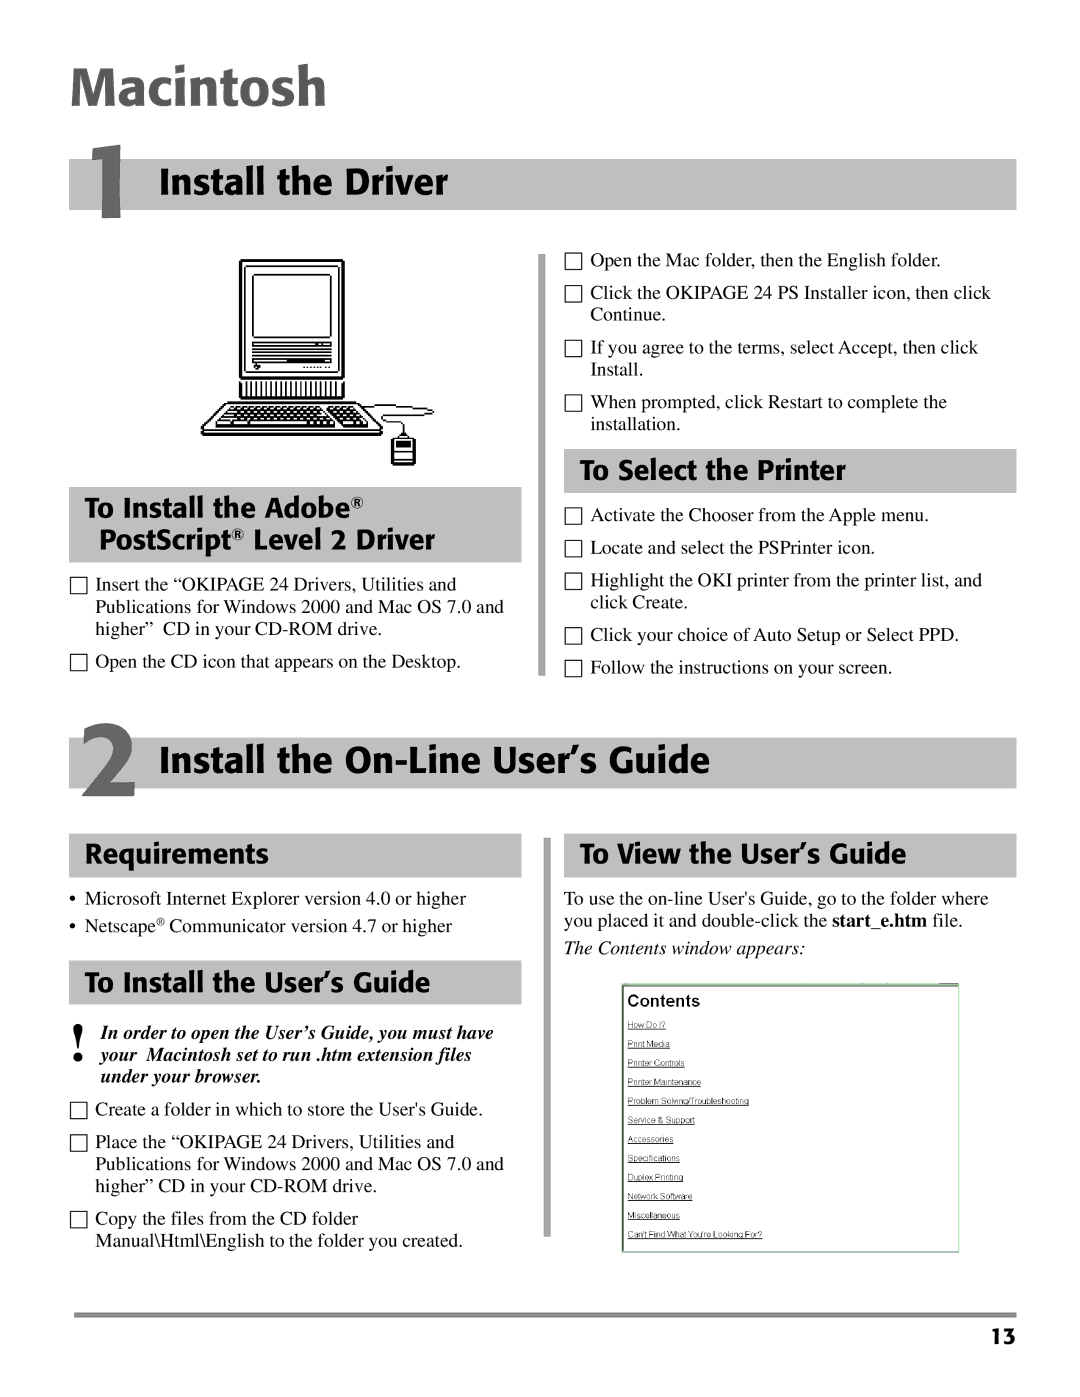 Oki PAGE 24 quick start Macintosh, Install the On-Line User’s Guide 